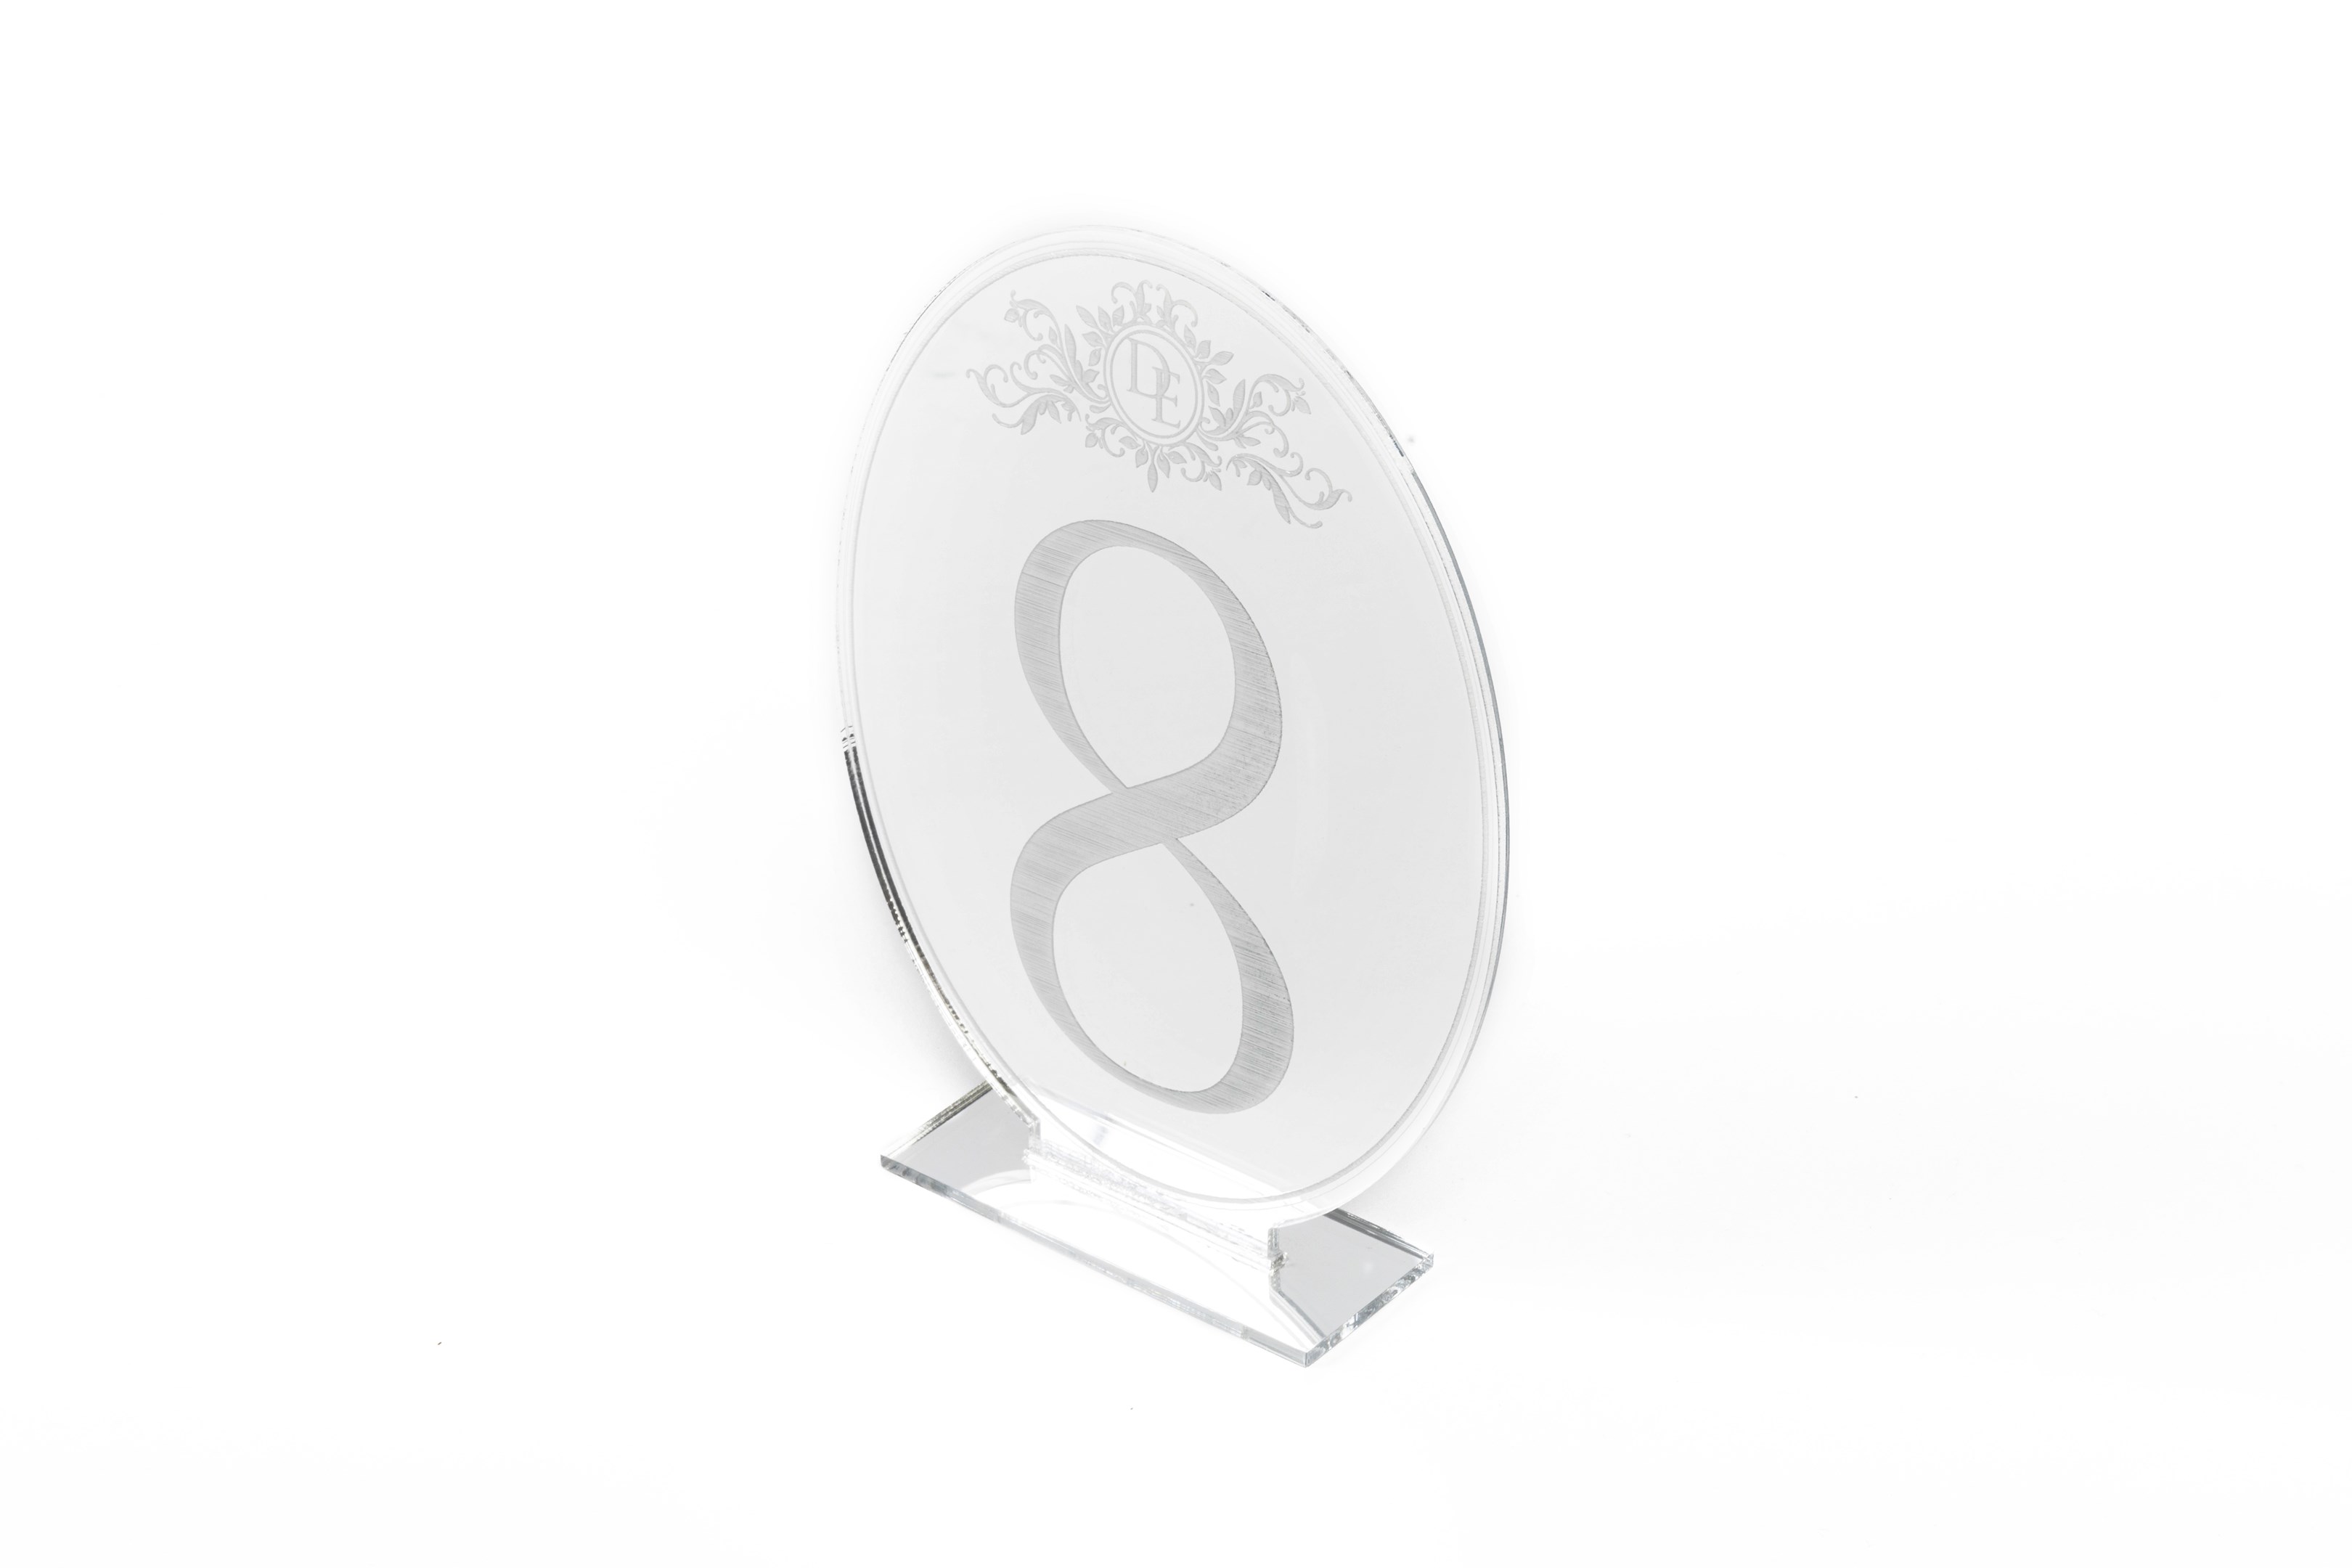 Engraved Numbers on Silver Mirrored Acrylic Oval Table Numbers